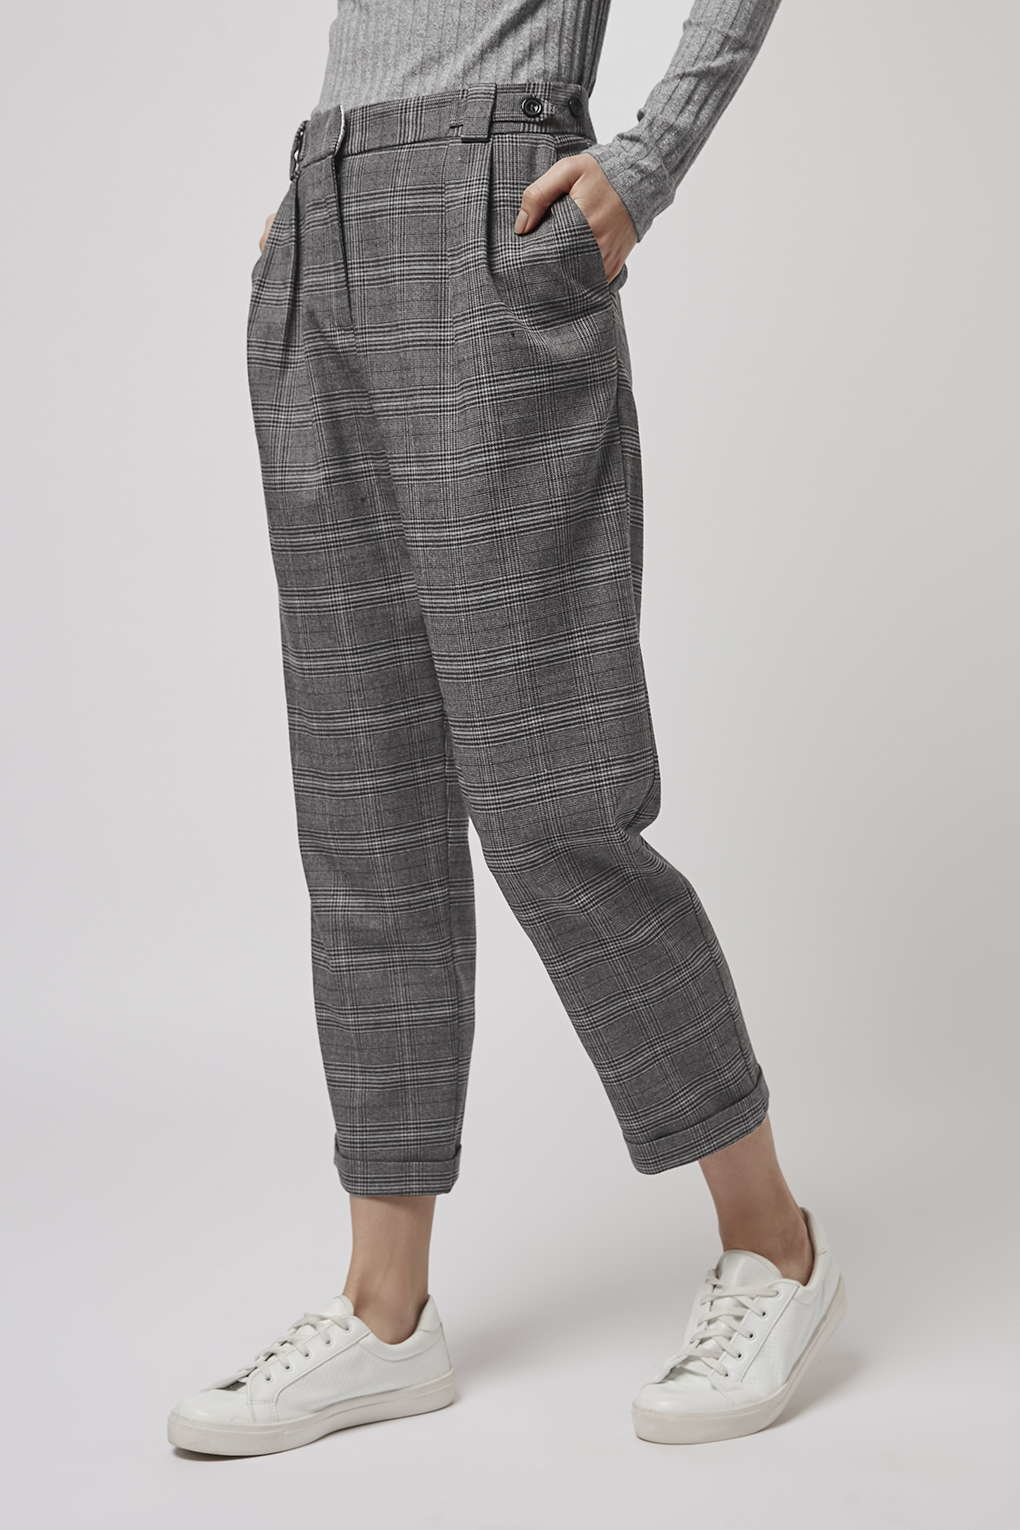 Topshop Check Peg Trousers in Gray - Lyst